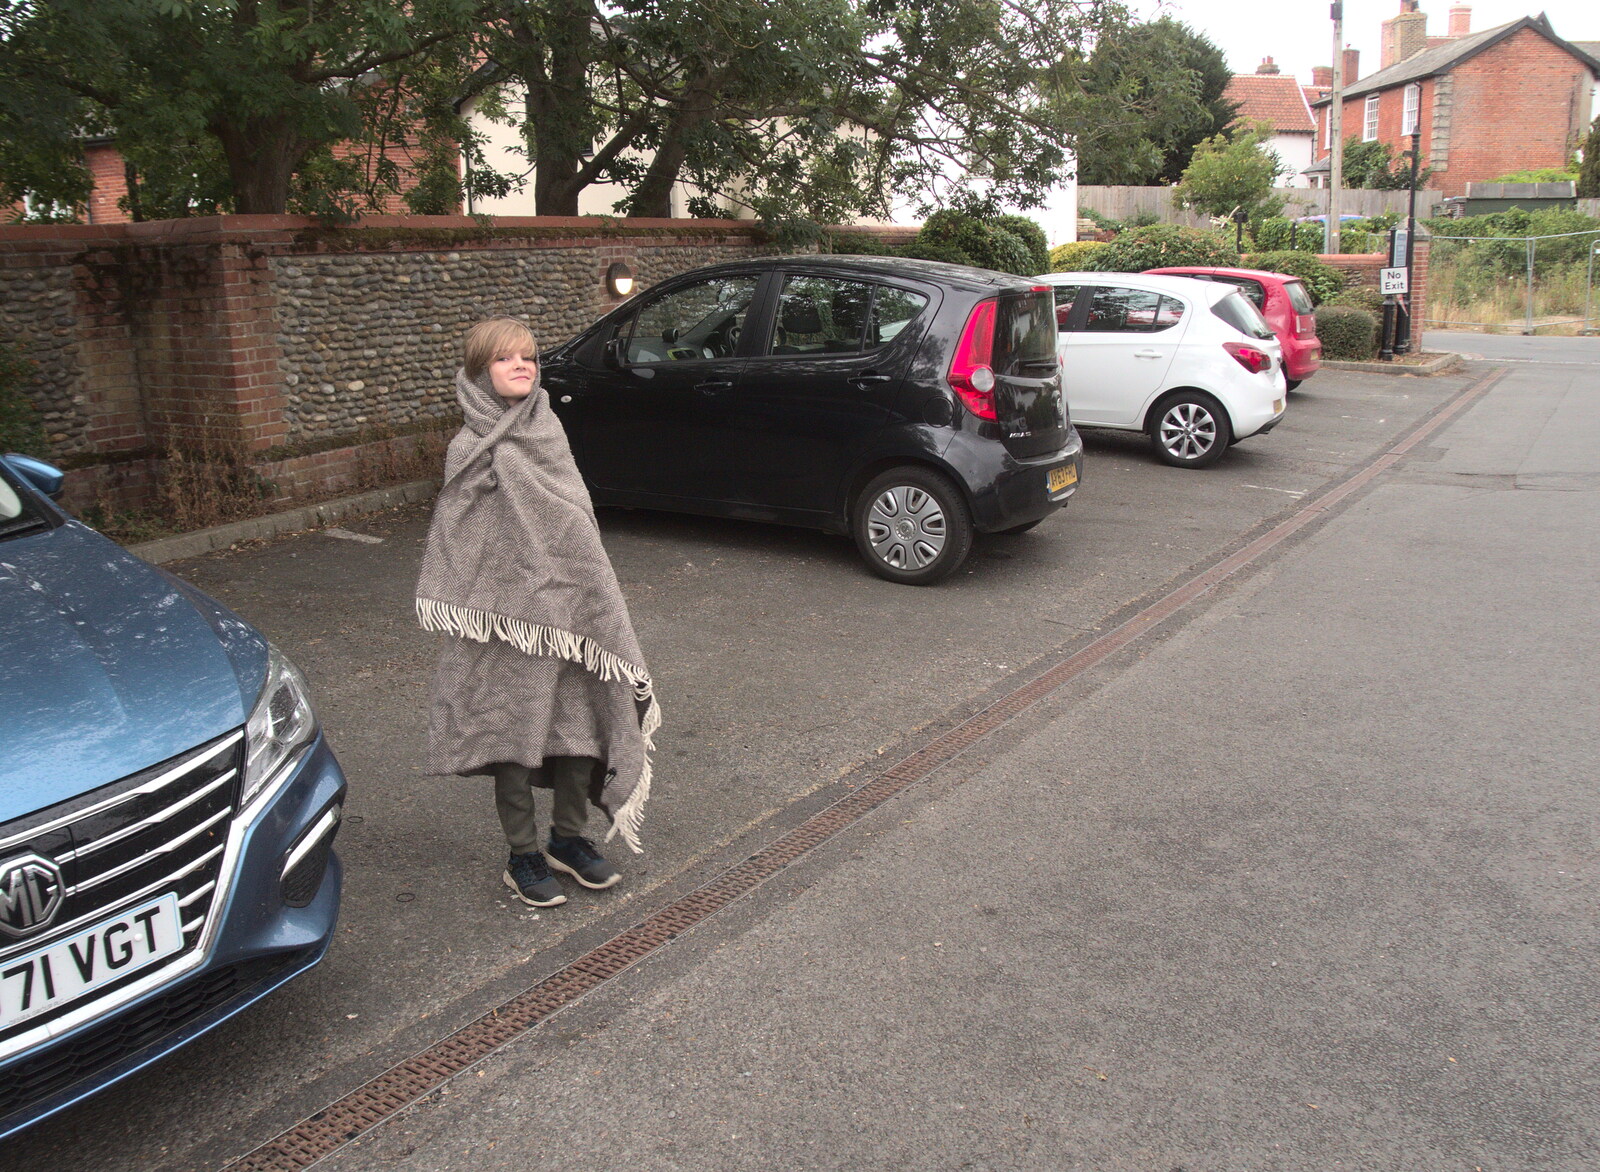 The Eye Piggy Tail Trail and Ipswich Dereliction, Suffolk - 29th July 2022: Harry roams around the car park in a blanket